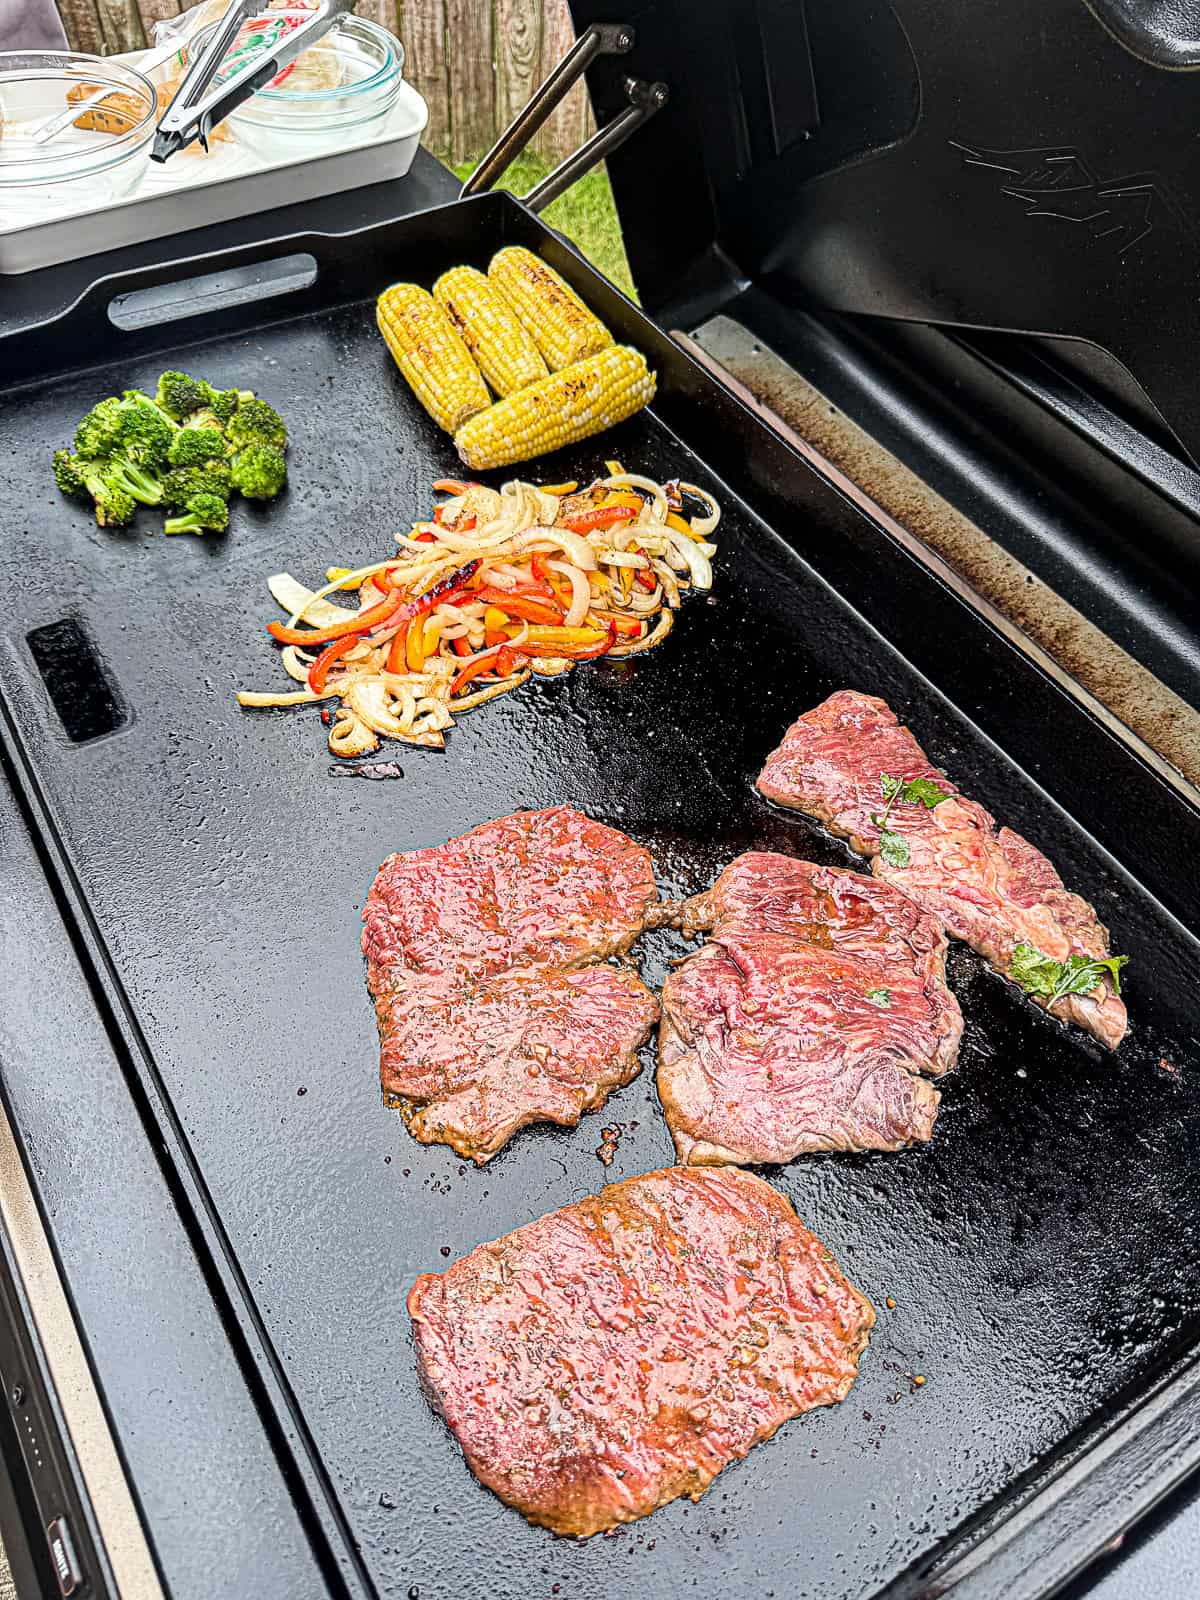 Griddle cooking skirt steak family dinner with meat and vegetables